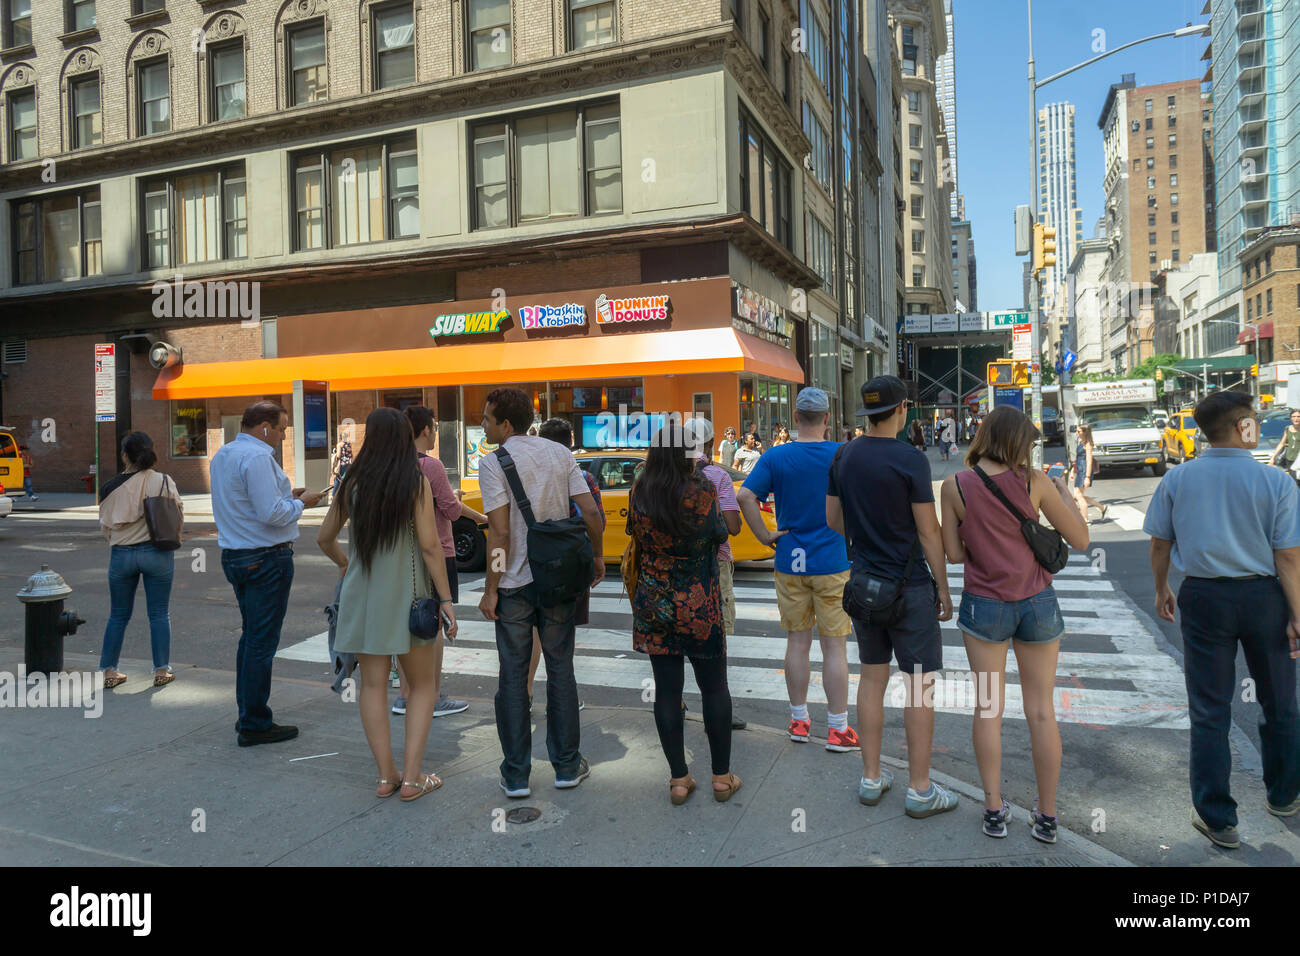 Pedestrians wait to cross in front of a triple-franchised storefront containing Subway sandwiches, Baskin-Robbins ice cream and Dunkin' Donuts franchises in New York on Tuesday, May 29, 2018. (Â© Richard B. Levine) Stock Photo